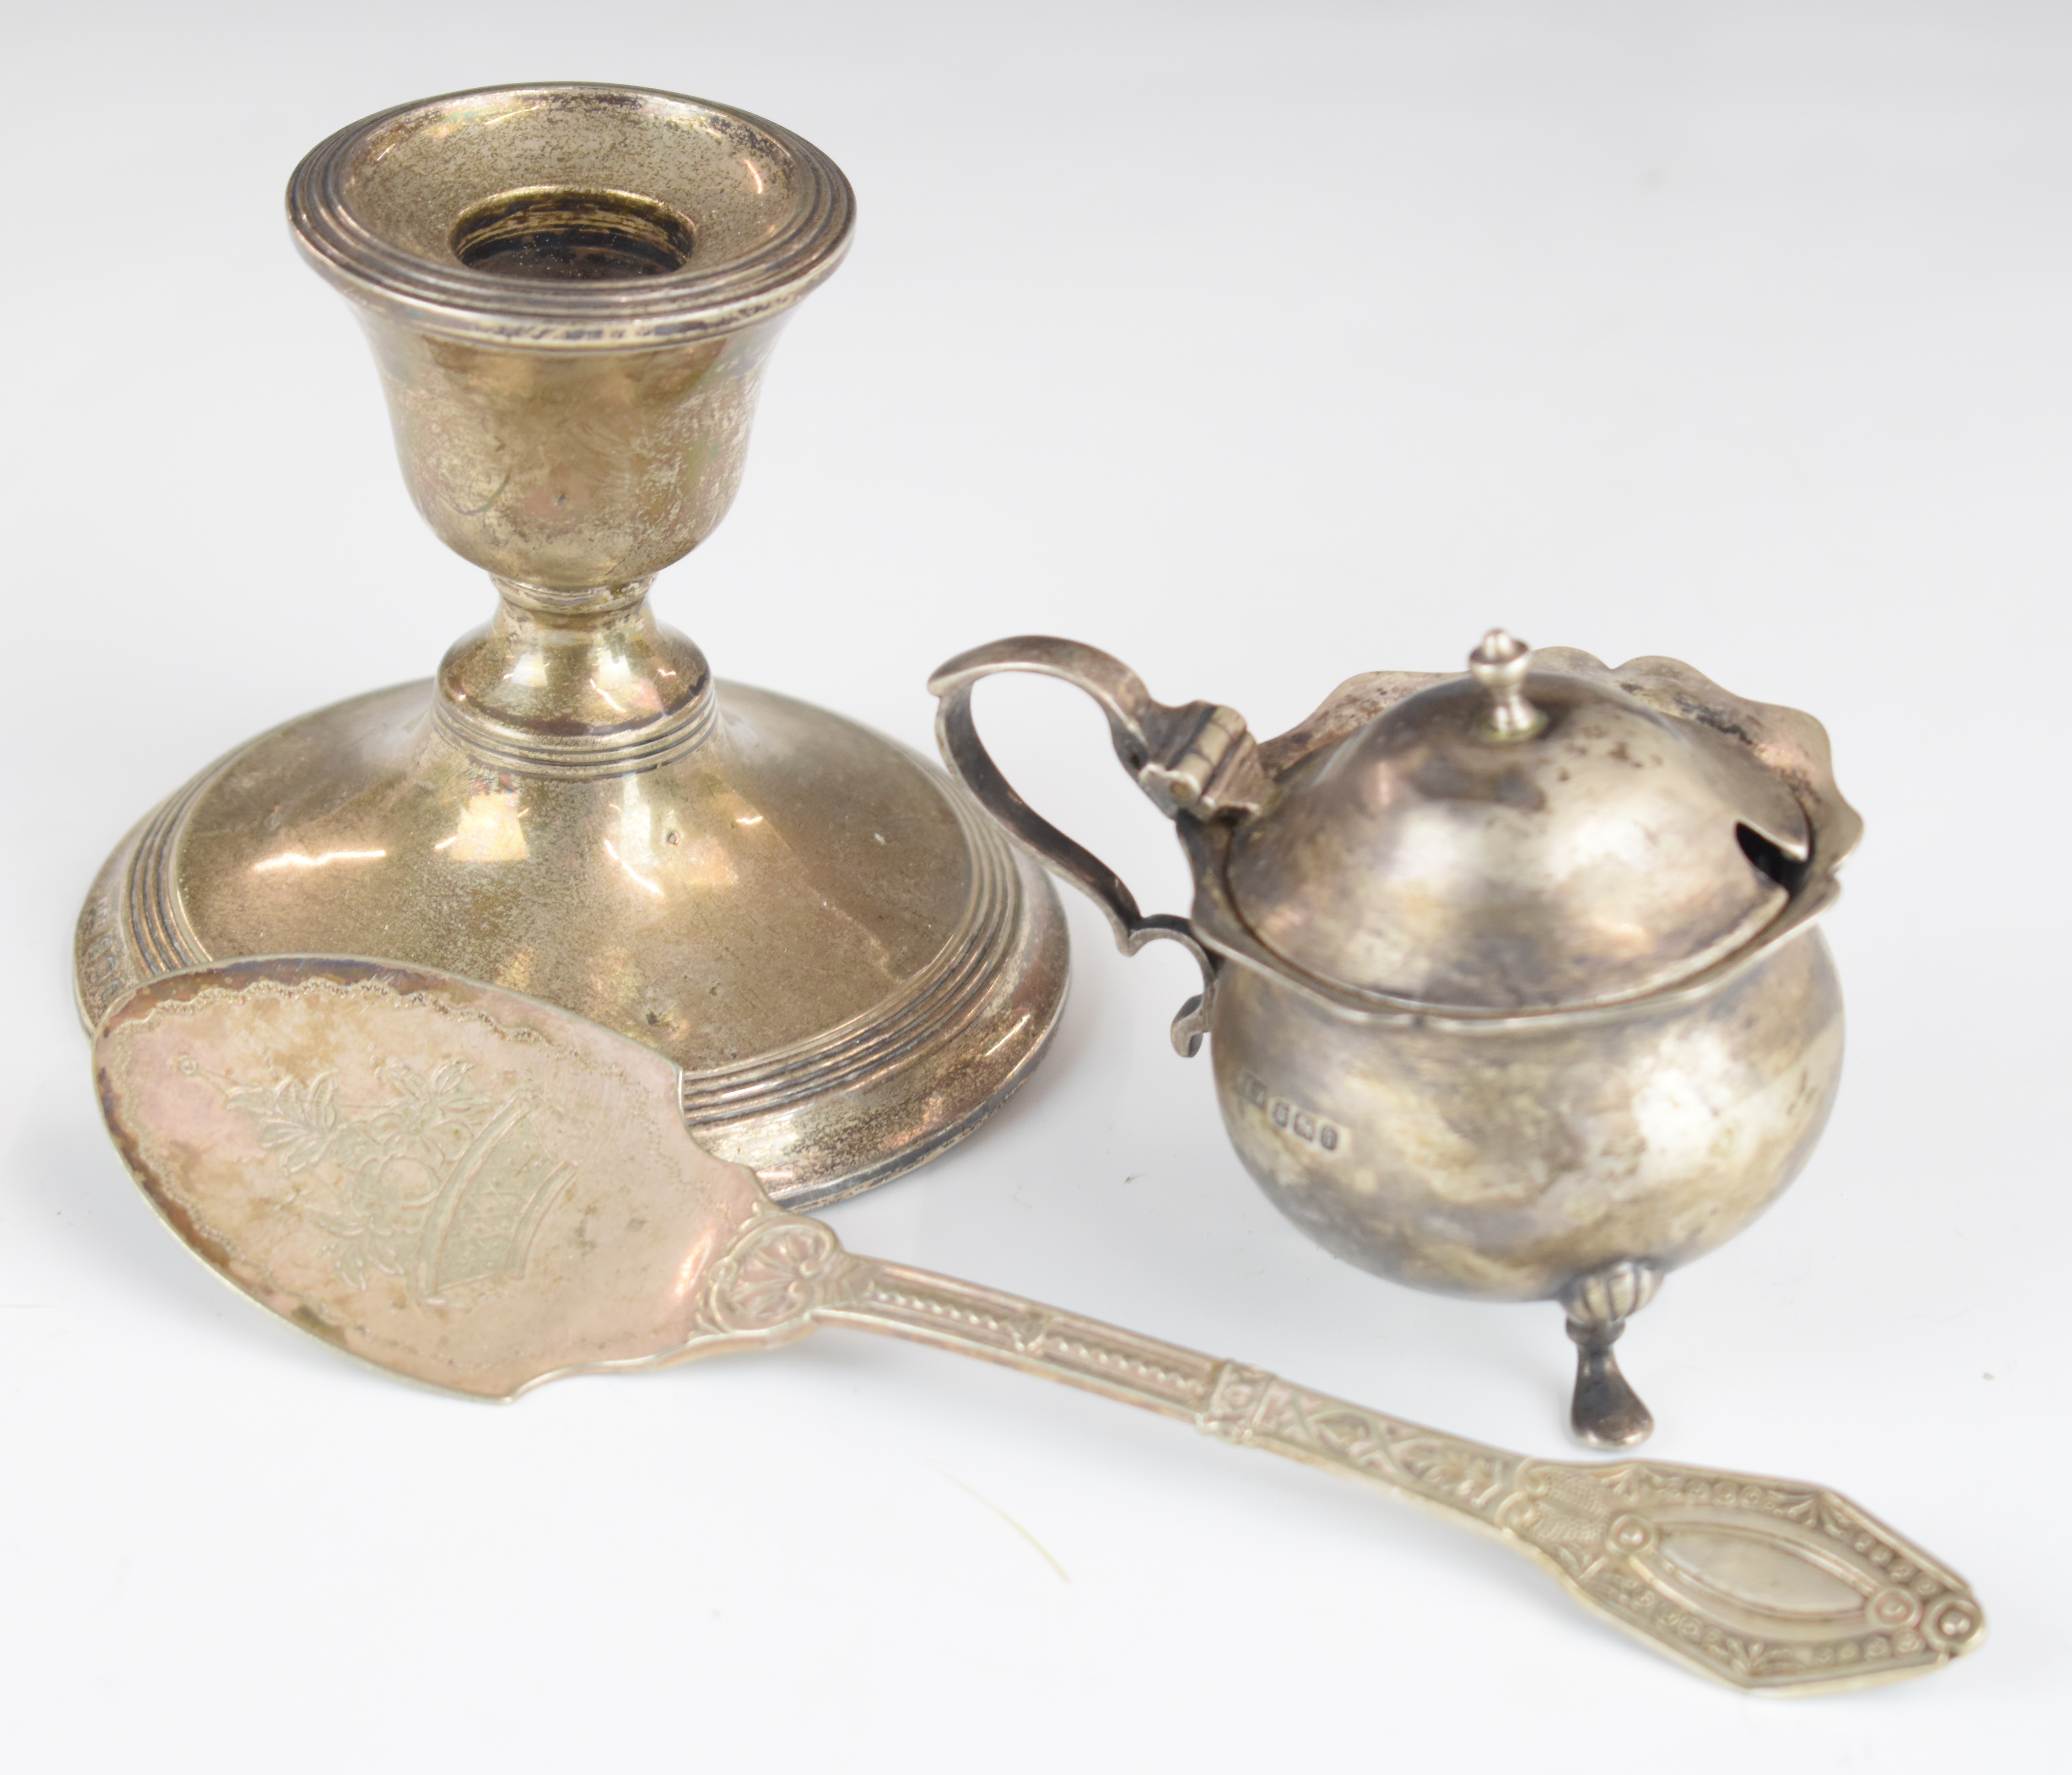 Hallmarked silver items to include candlestick, hand mirror, brushes, card case, silver handled - Image 6 of 9